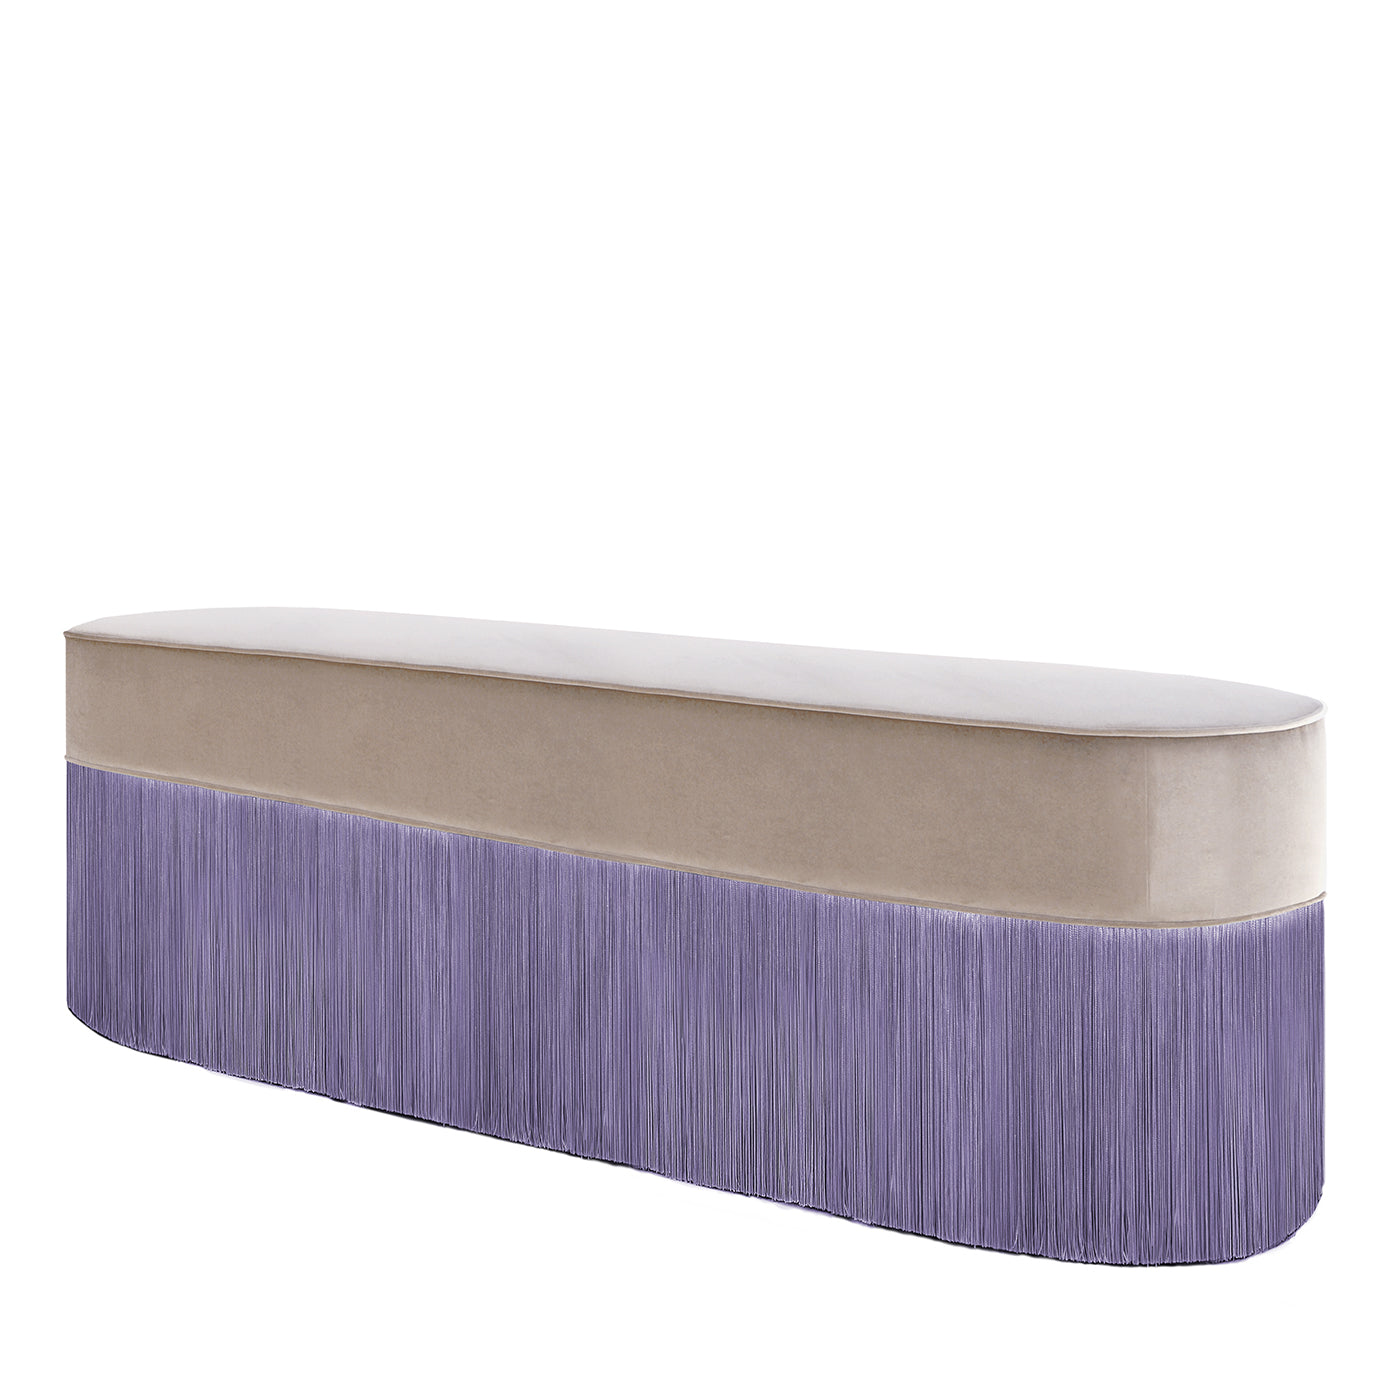 Fringed Beige & Lilac Bench - Alternative view 2